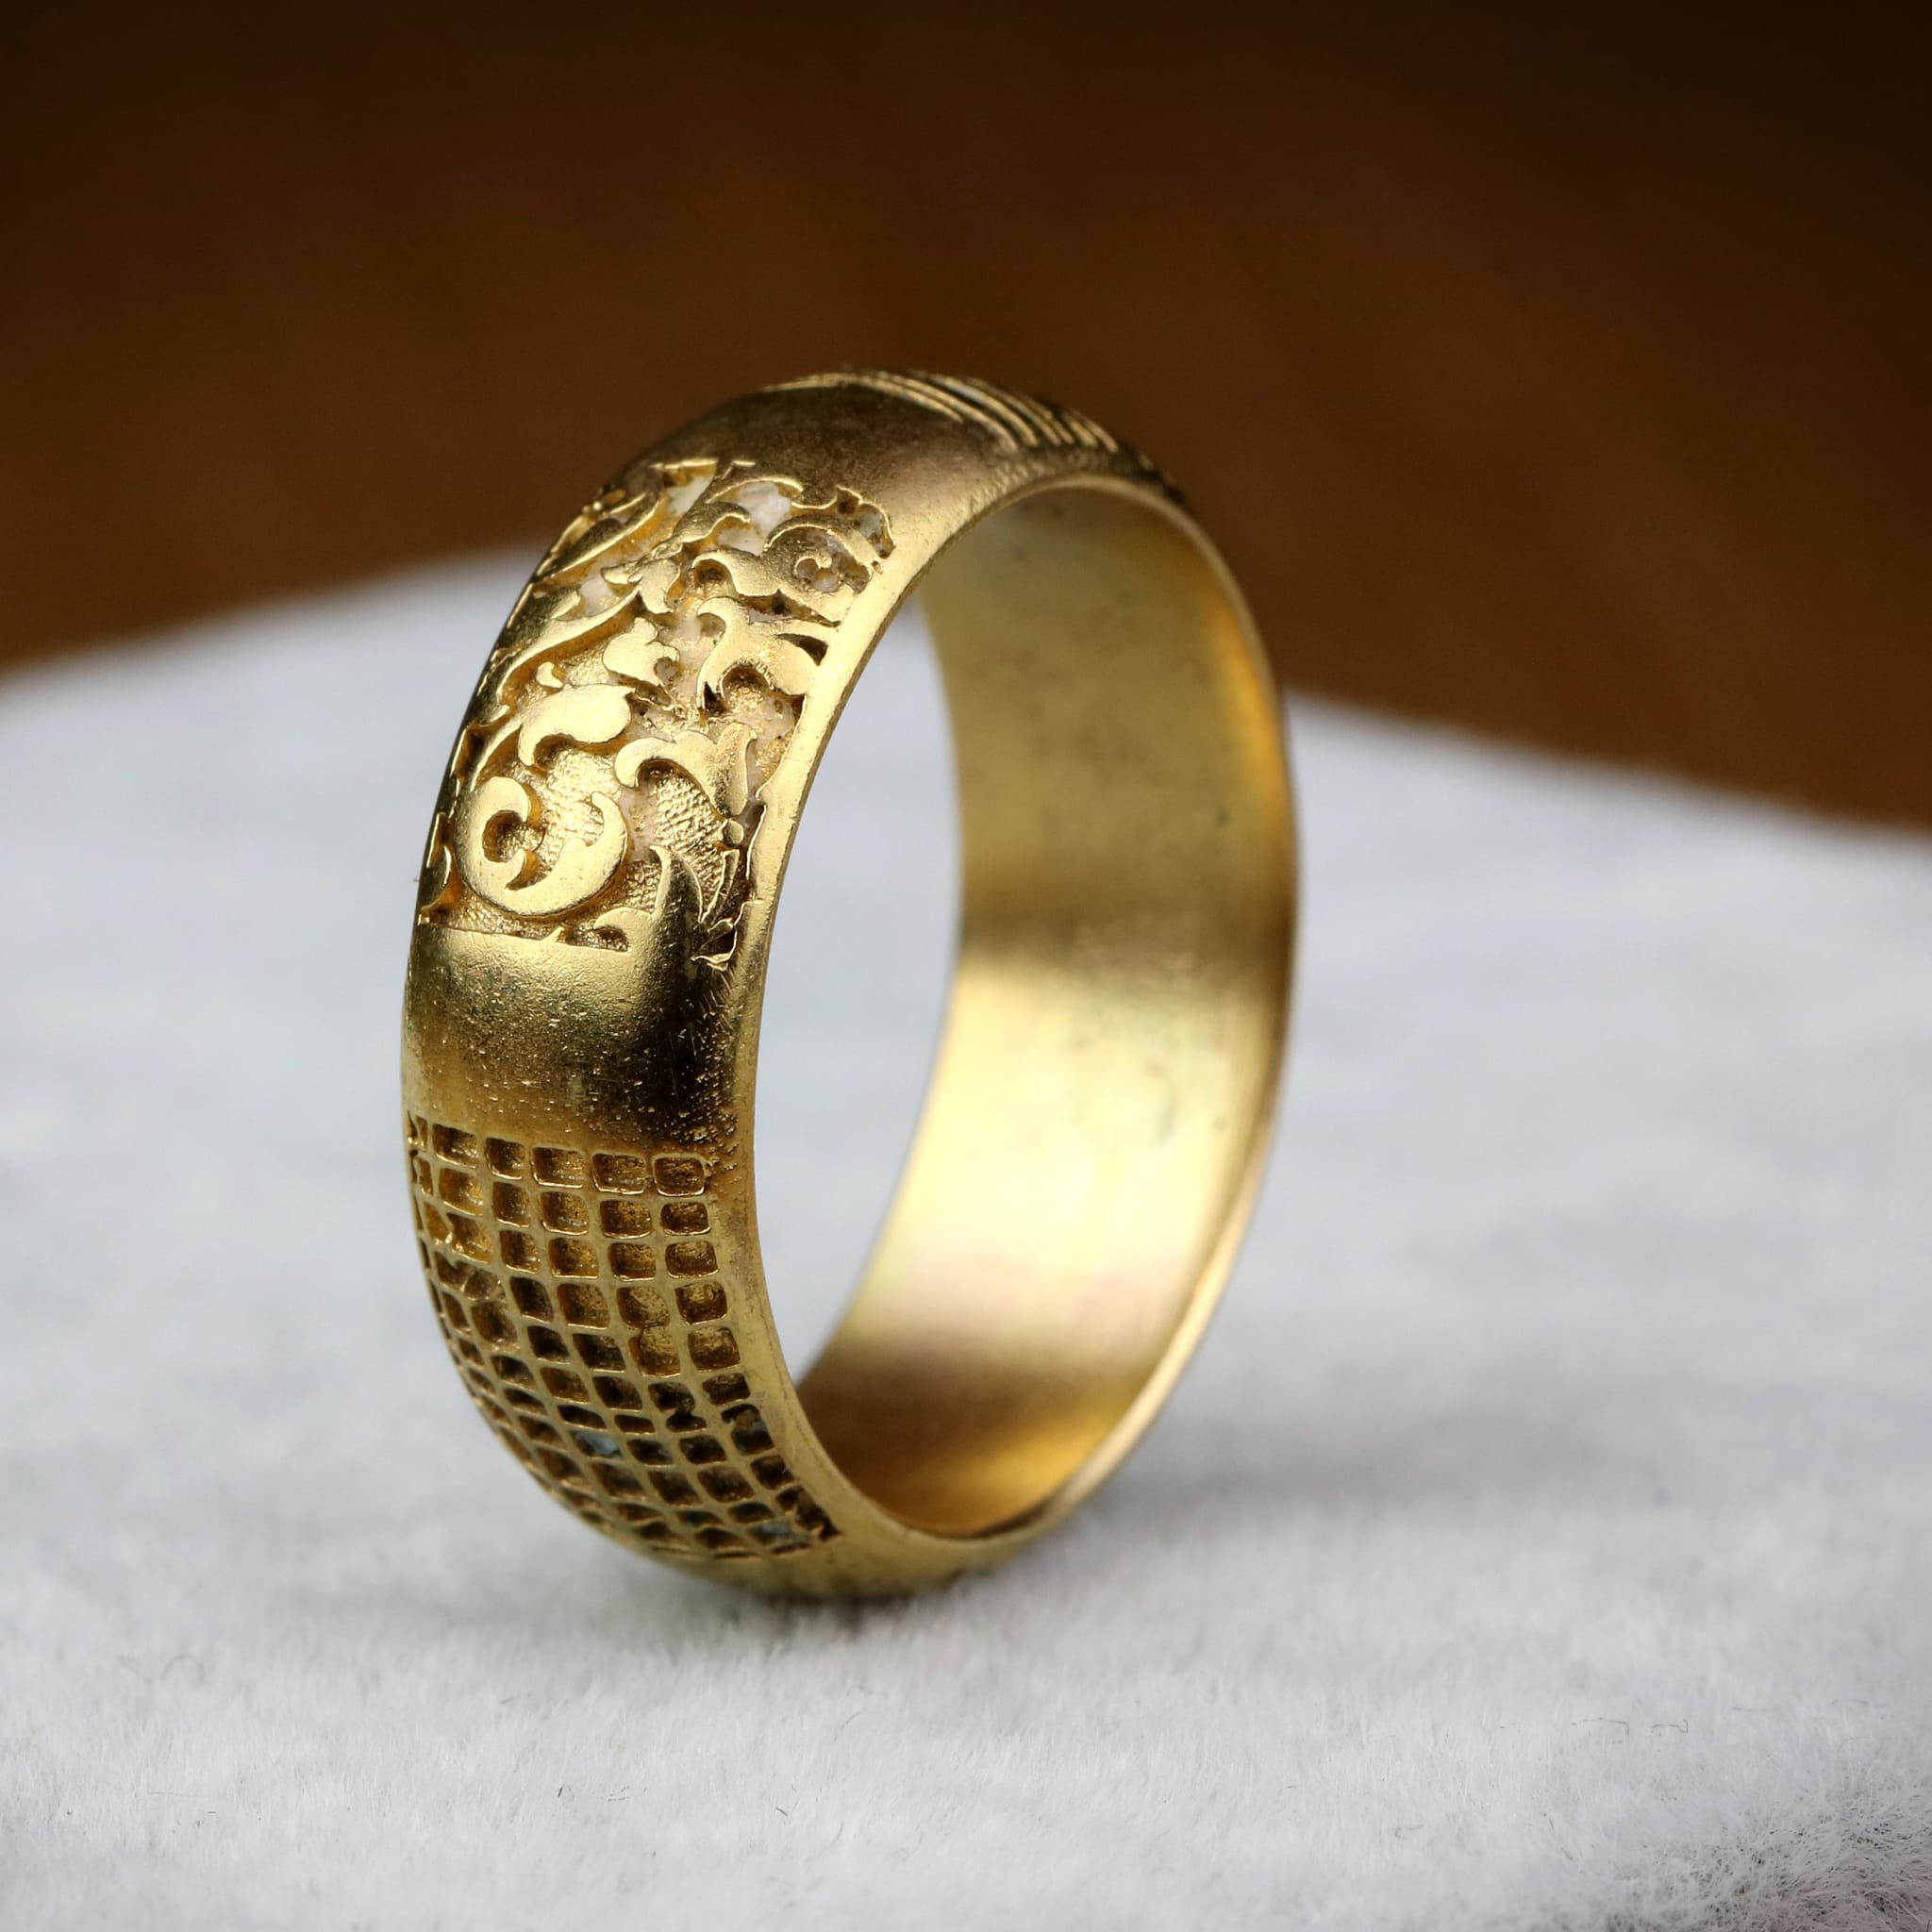 Detailed Gold Textured Ring Jewelry – JewelryByTm